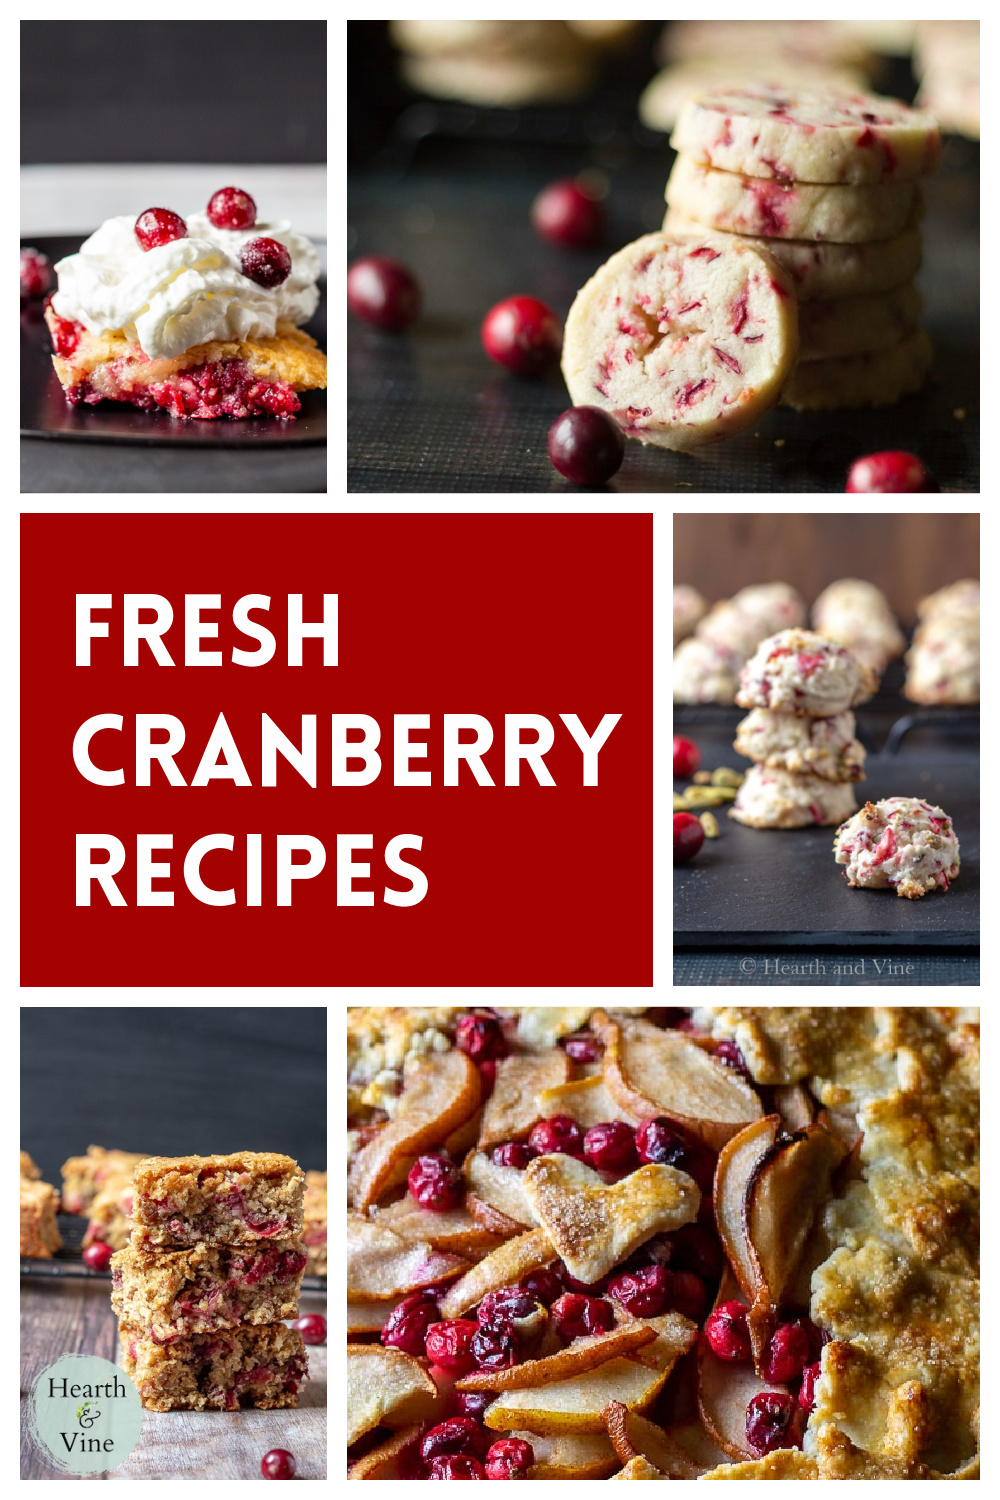 9 Fresh Cranberry Recipes for the Holidays | Hearth and Vine